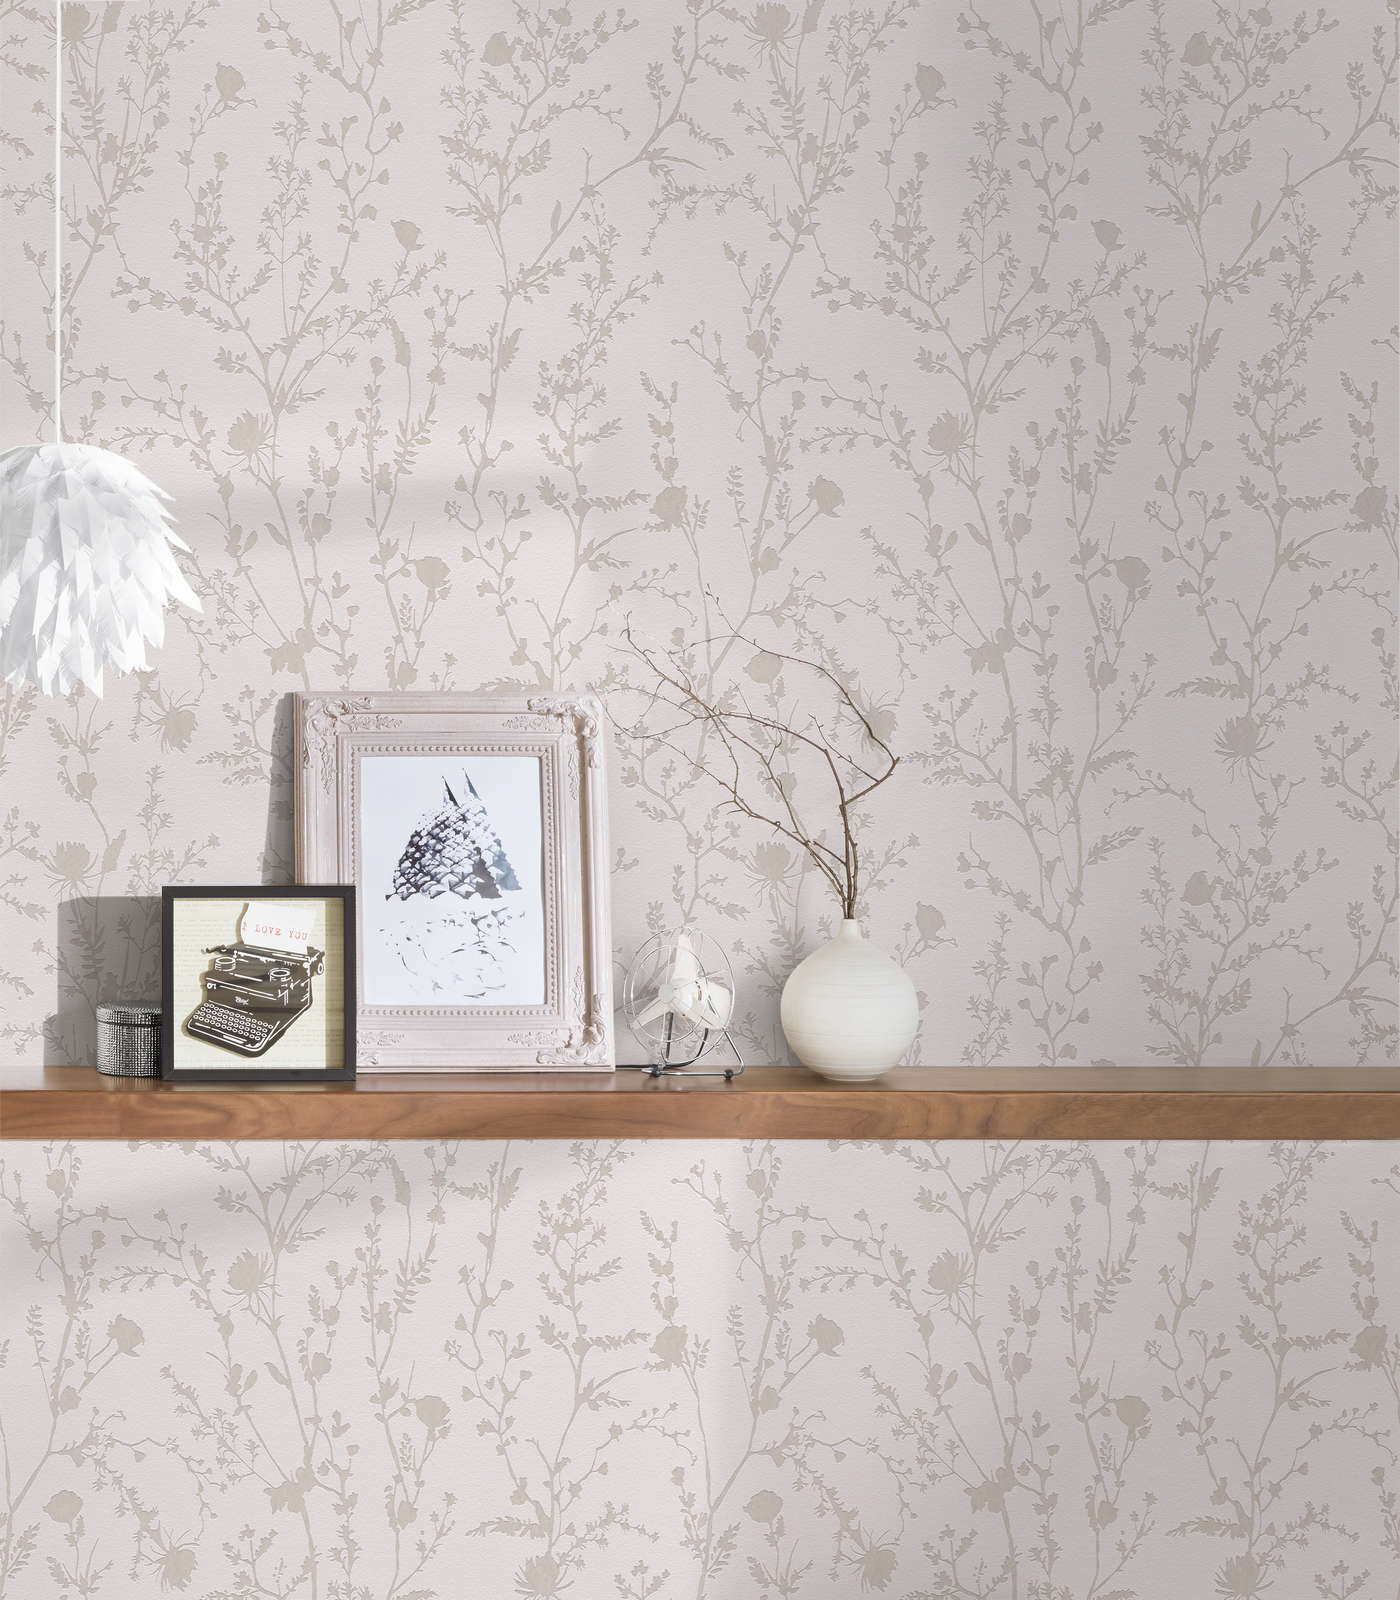             Floral non-woven wallpaper with a playful floral pattern - light pink, light grey
        